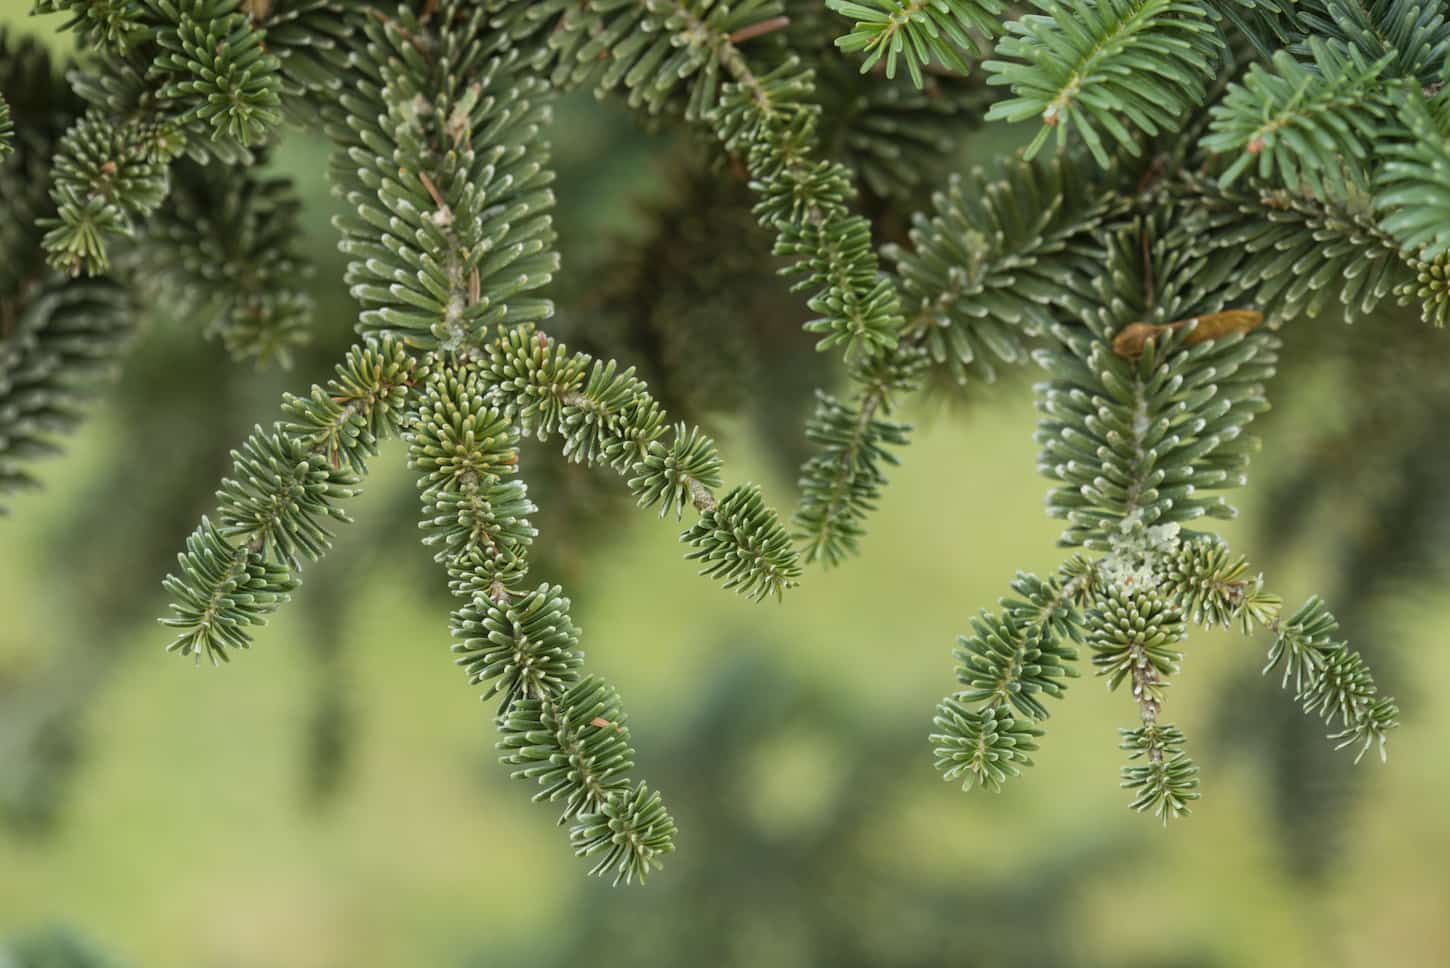 An image of a Norway spruce tree with detail of leaves.